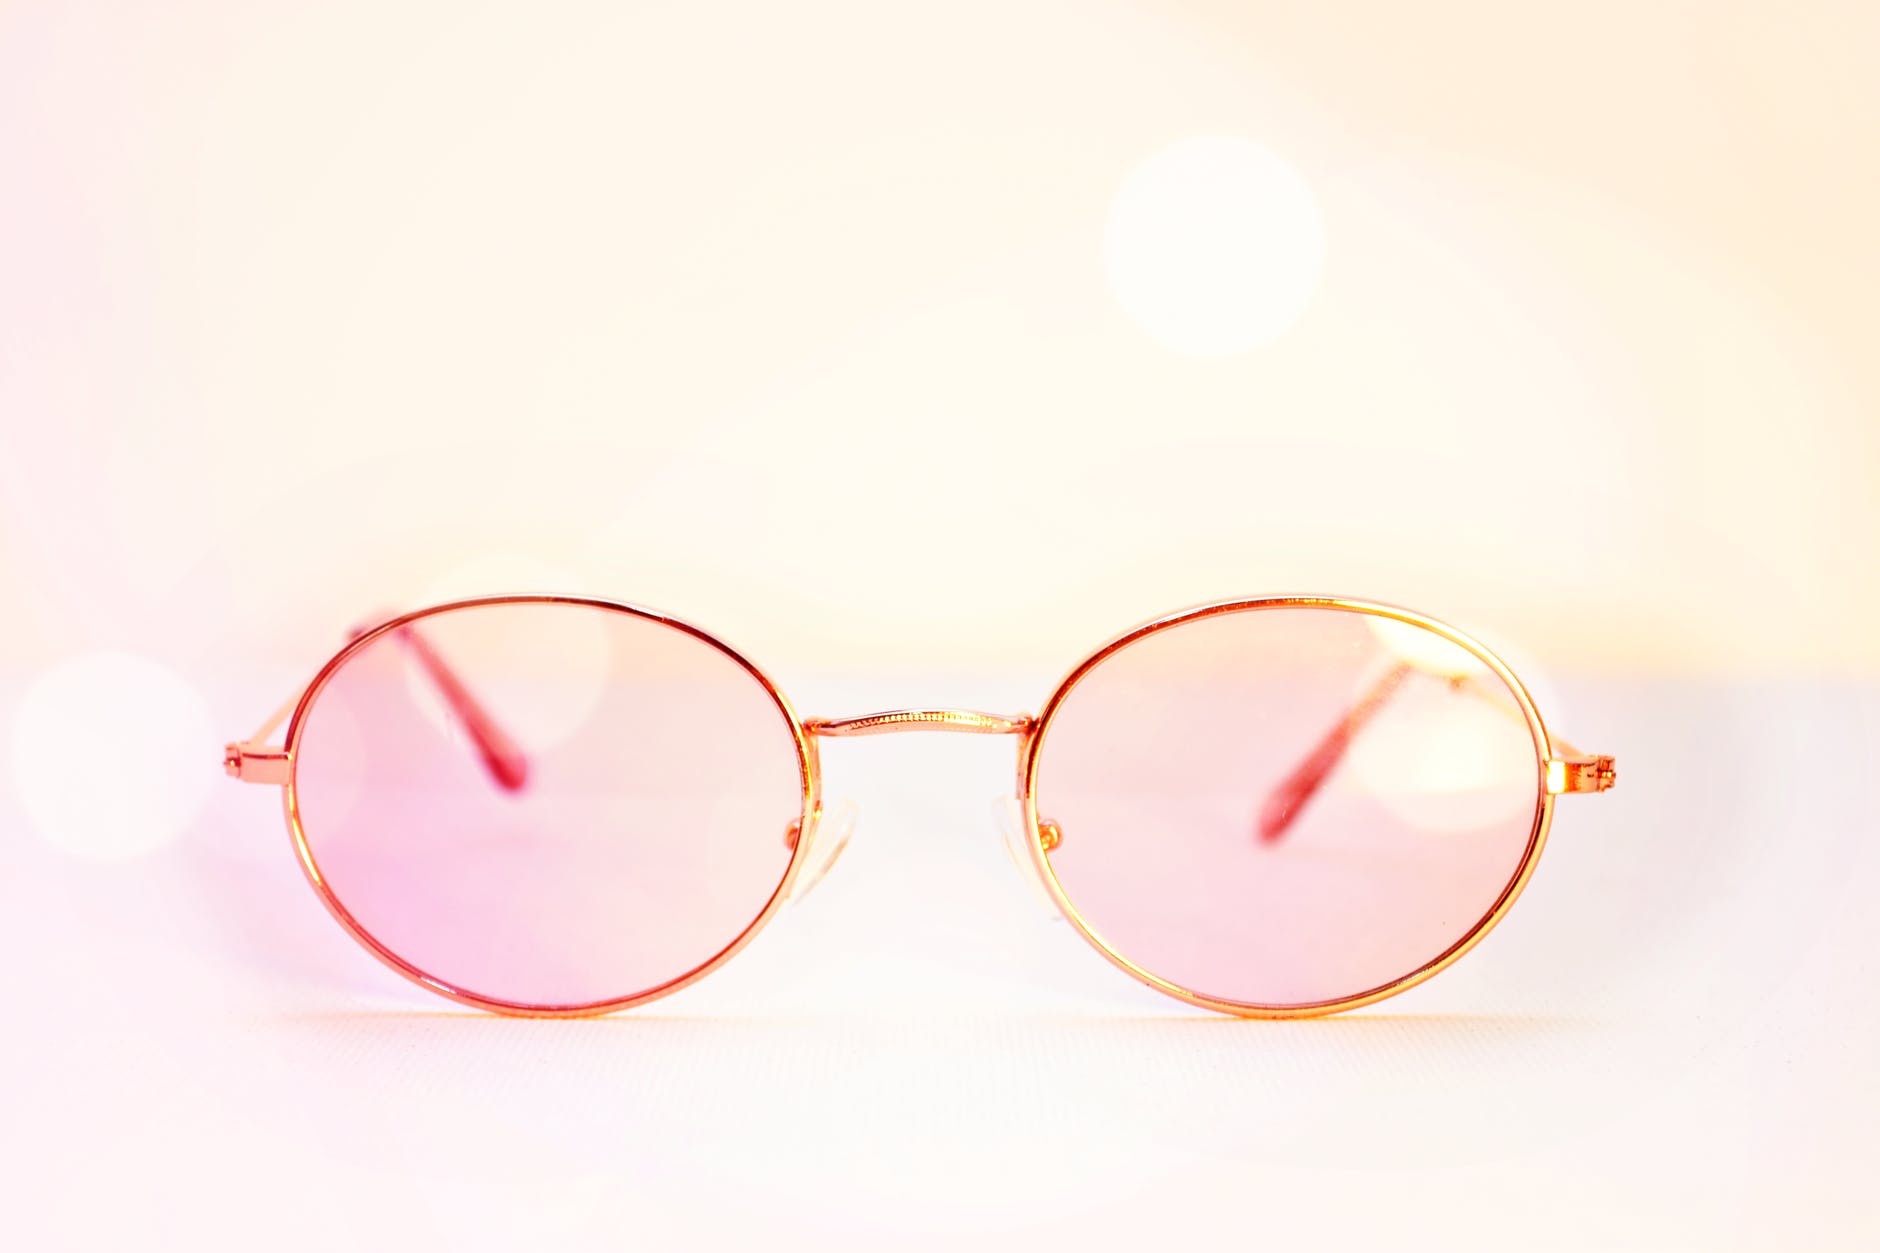 Light pink tinted glasses